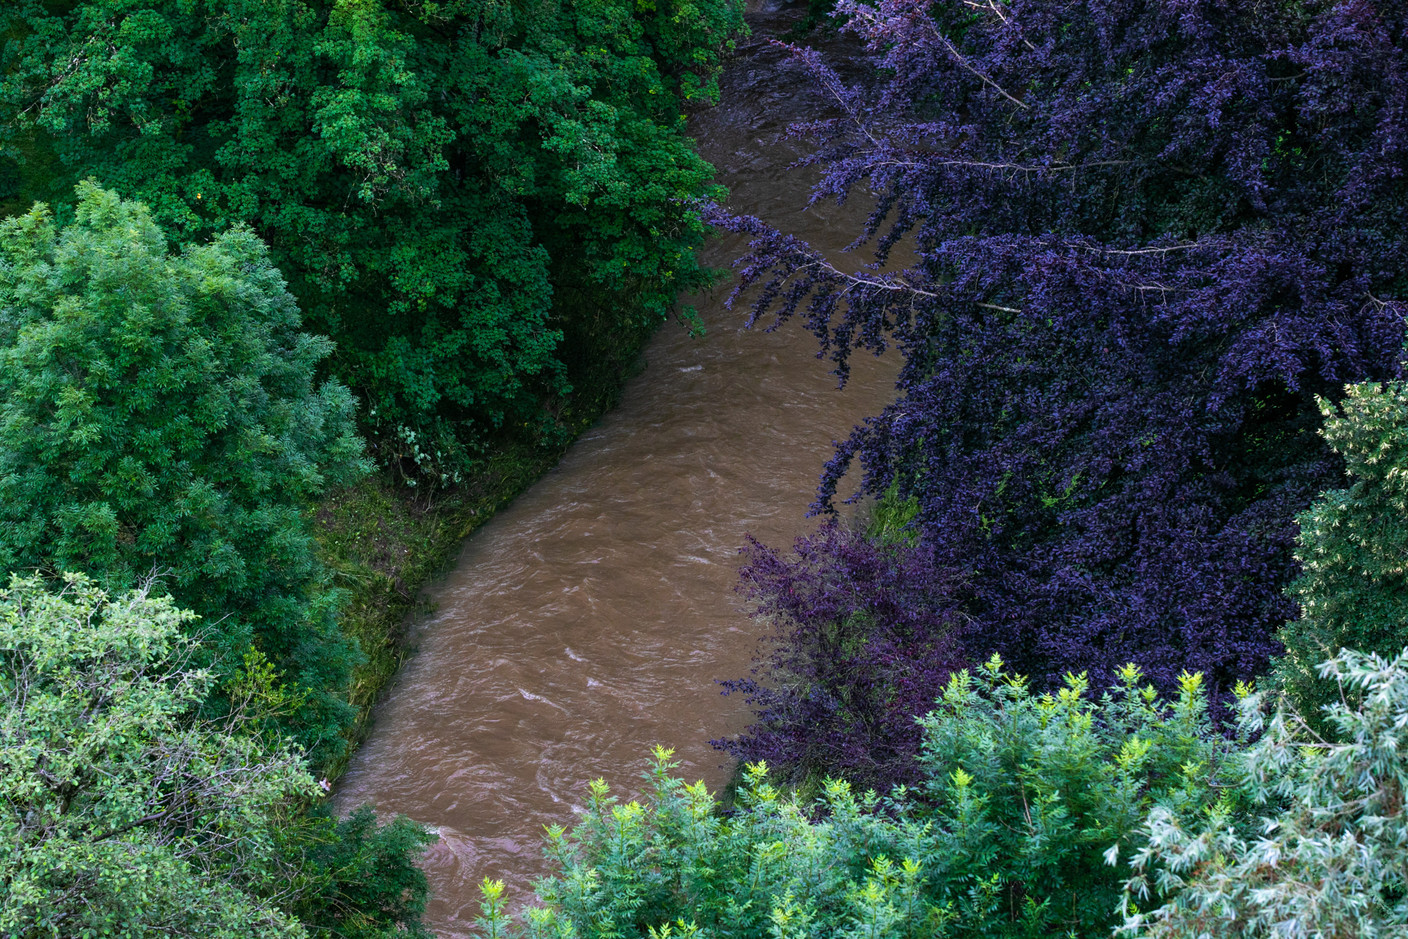 The Petrusse river in Luxembourg City, 15 July 2021. Matic Zorman / Maison Moderne